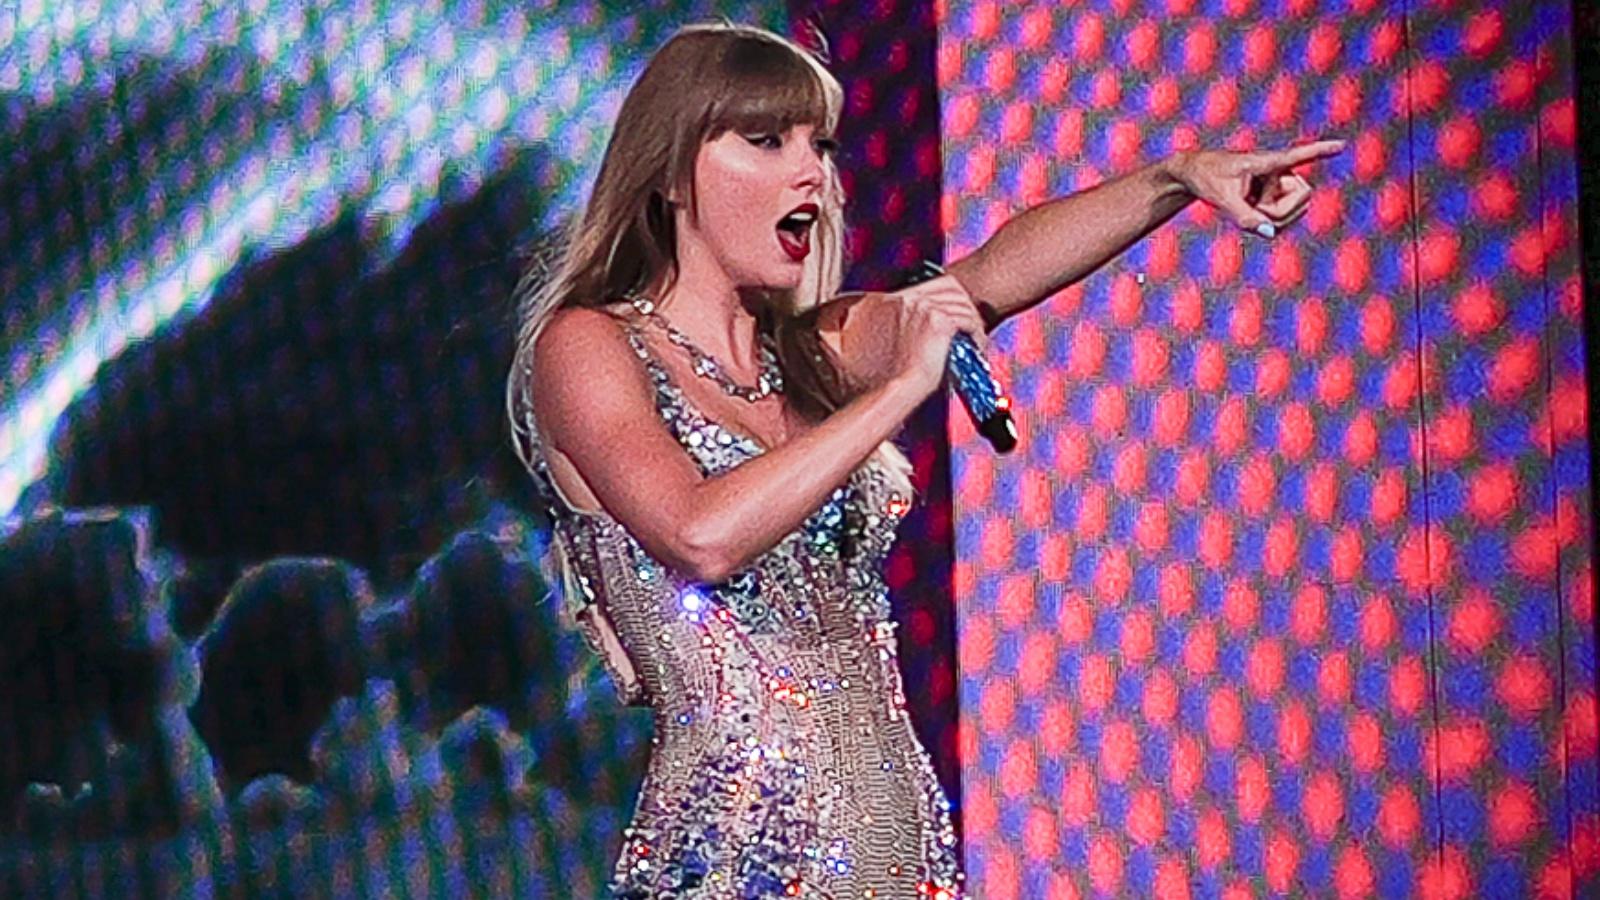 Taylor Swift performing onstage at a concert